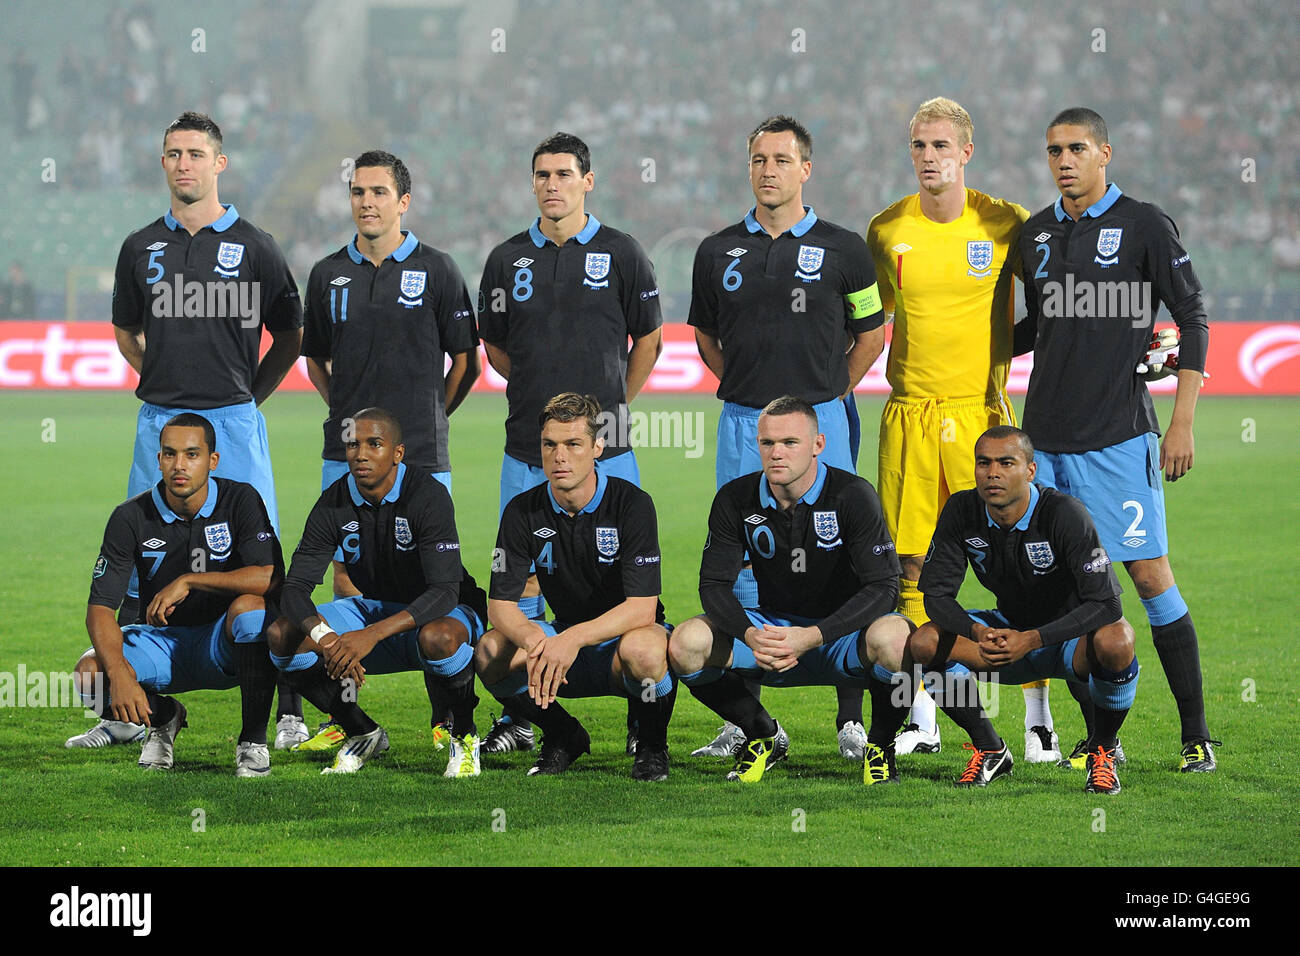 England team group of (back row left to right) Gary Cahill, Stewart Downing, Gareth Barry, John Terry, Joe Hart, Chris Smalling, (front row left to right) Theo Walcott, Ashley Young, Scott Parker, Wayne Rooney and Ashley Cole line up before the European Championship Qualifying match at the Vasil Levski Stadium, Sofia, Bulgaria. Stock Photo